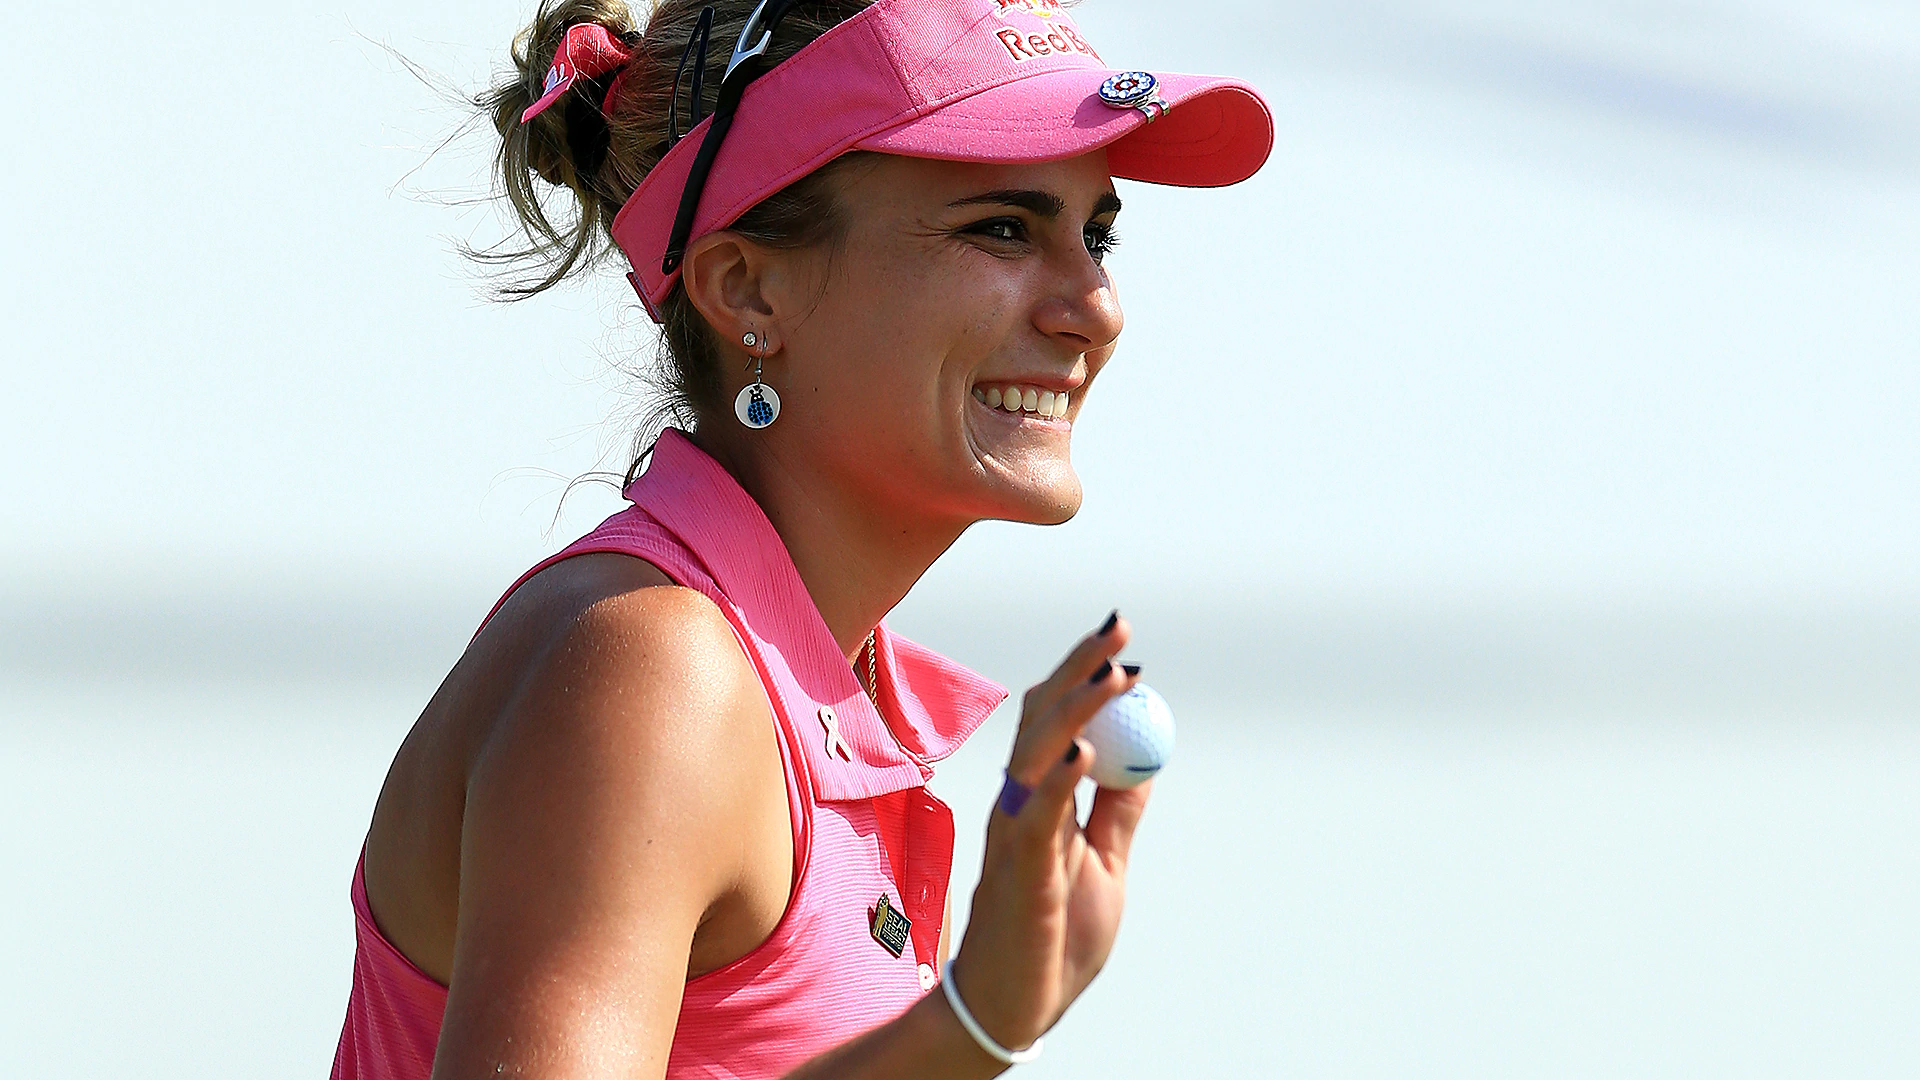 Lexi now career-high No. 2 ahead of Women's British